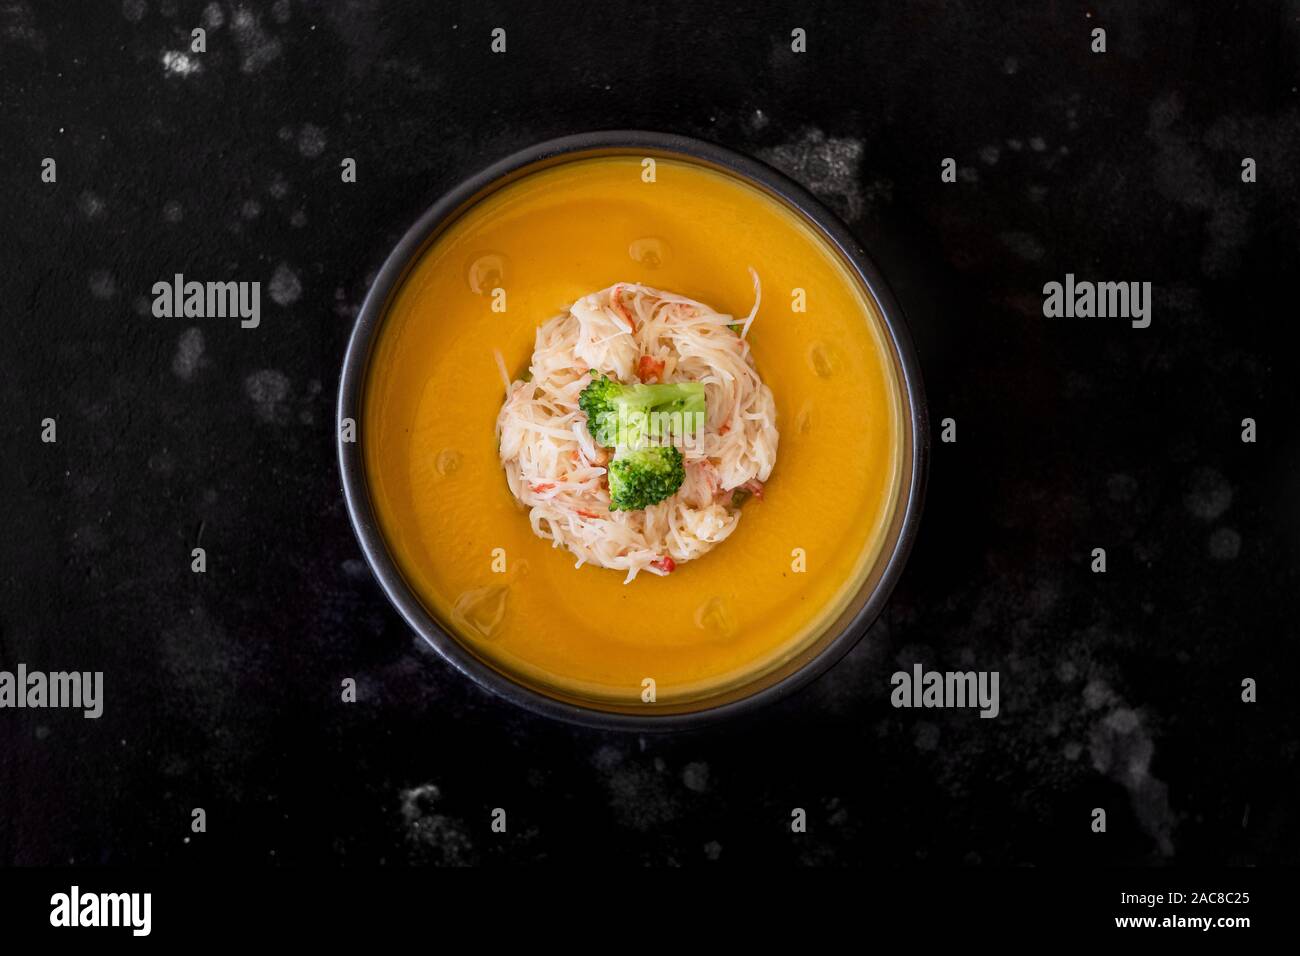 Cream soup with crab Stock Photo